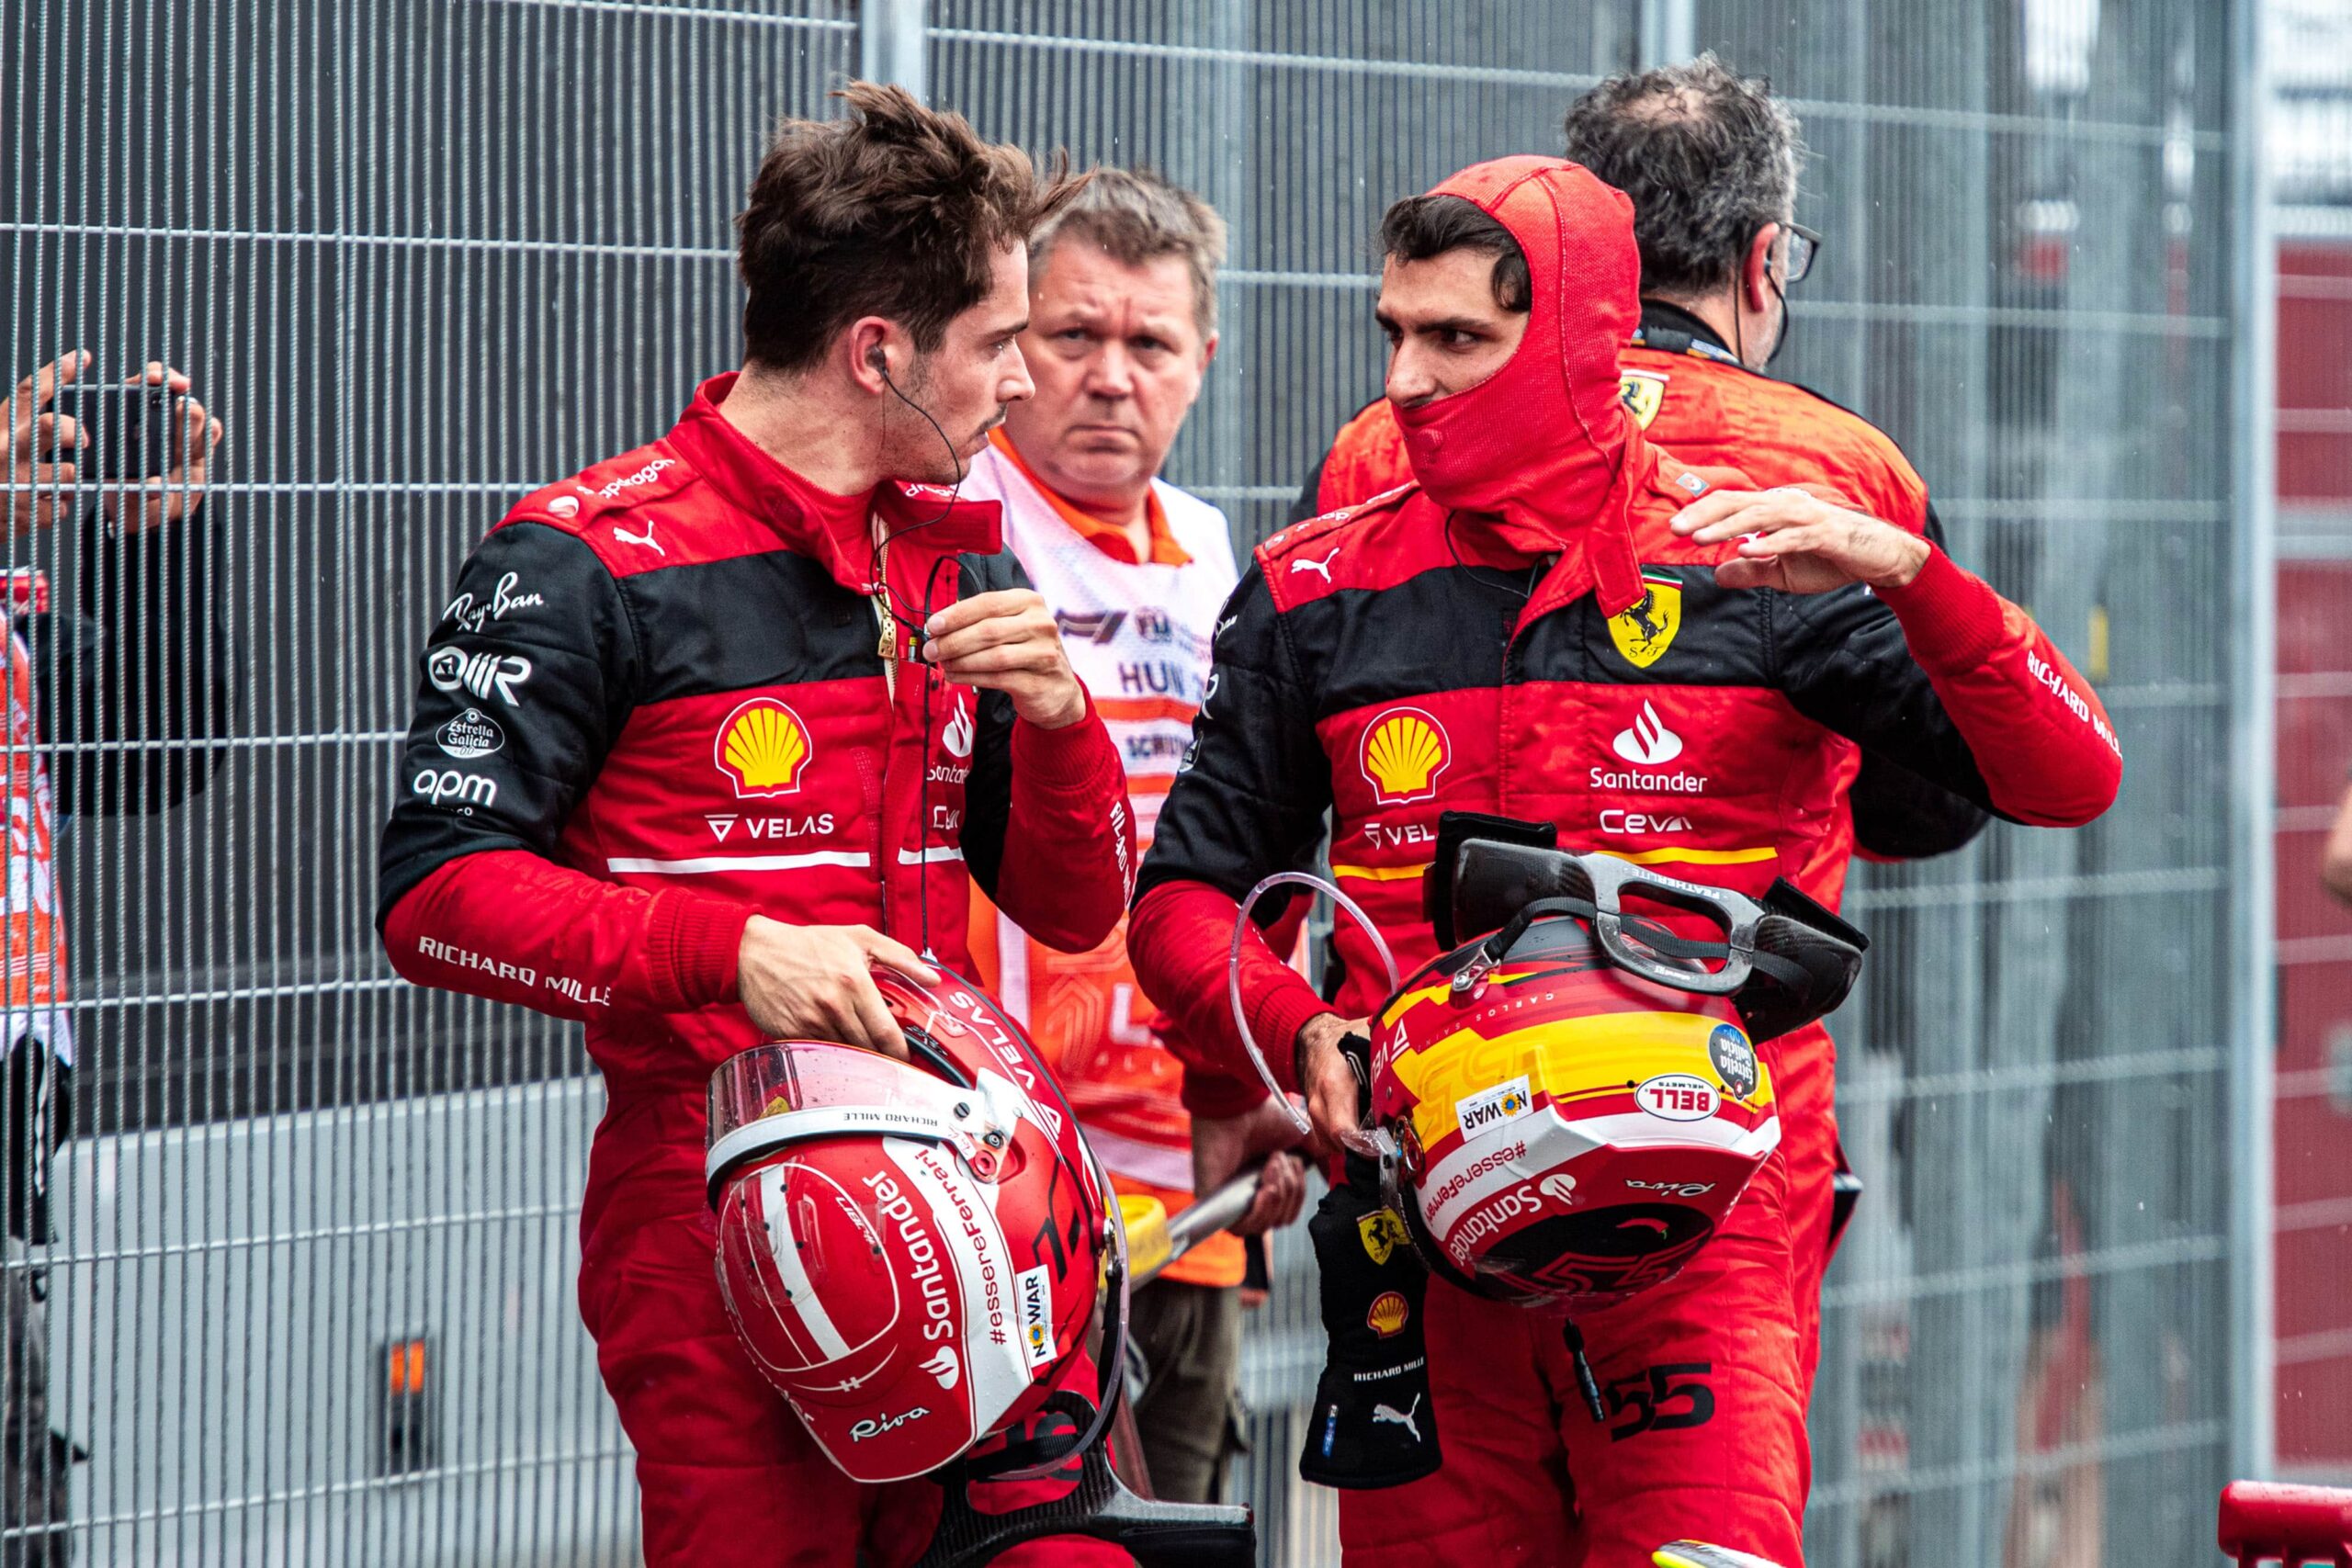 Ferrari drivers lost out to Red Bull and Mercedes in the strategy battle